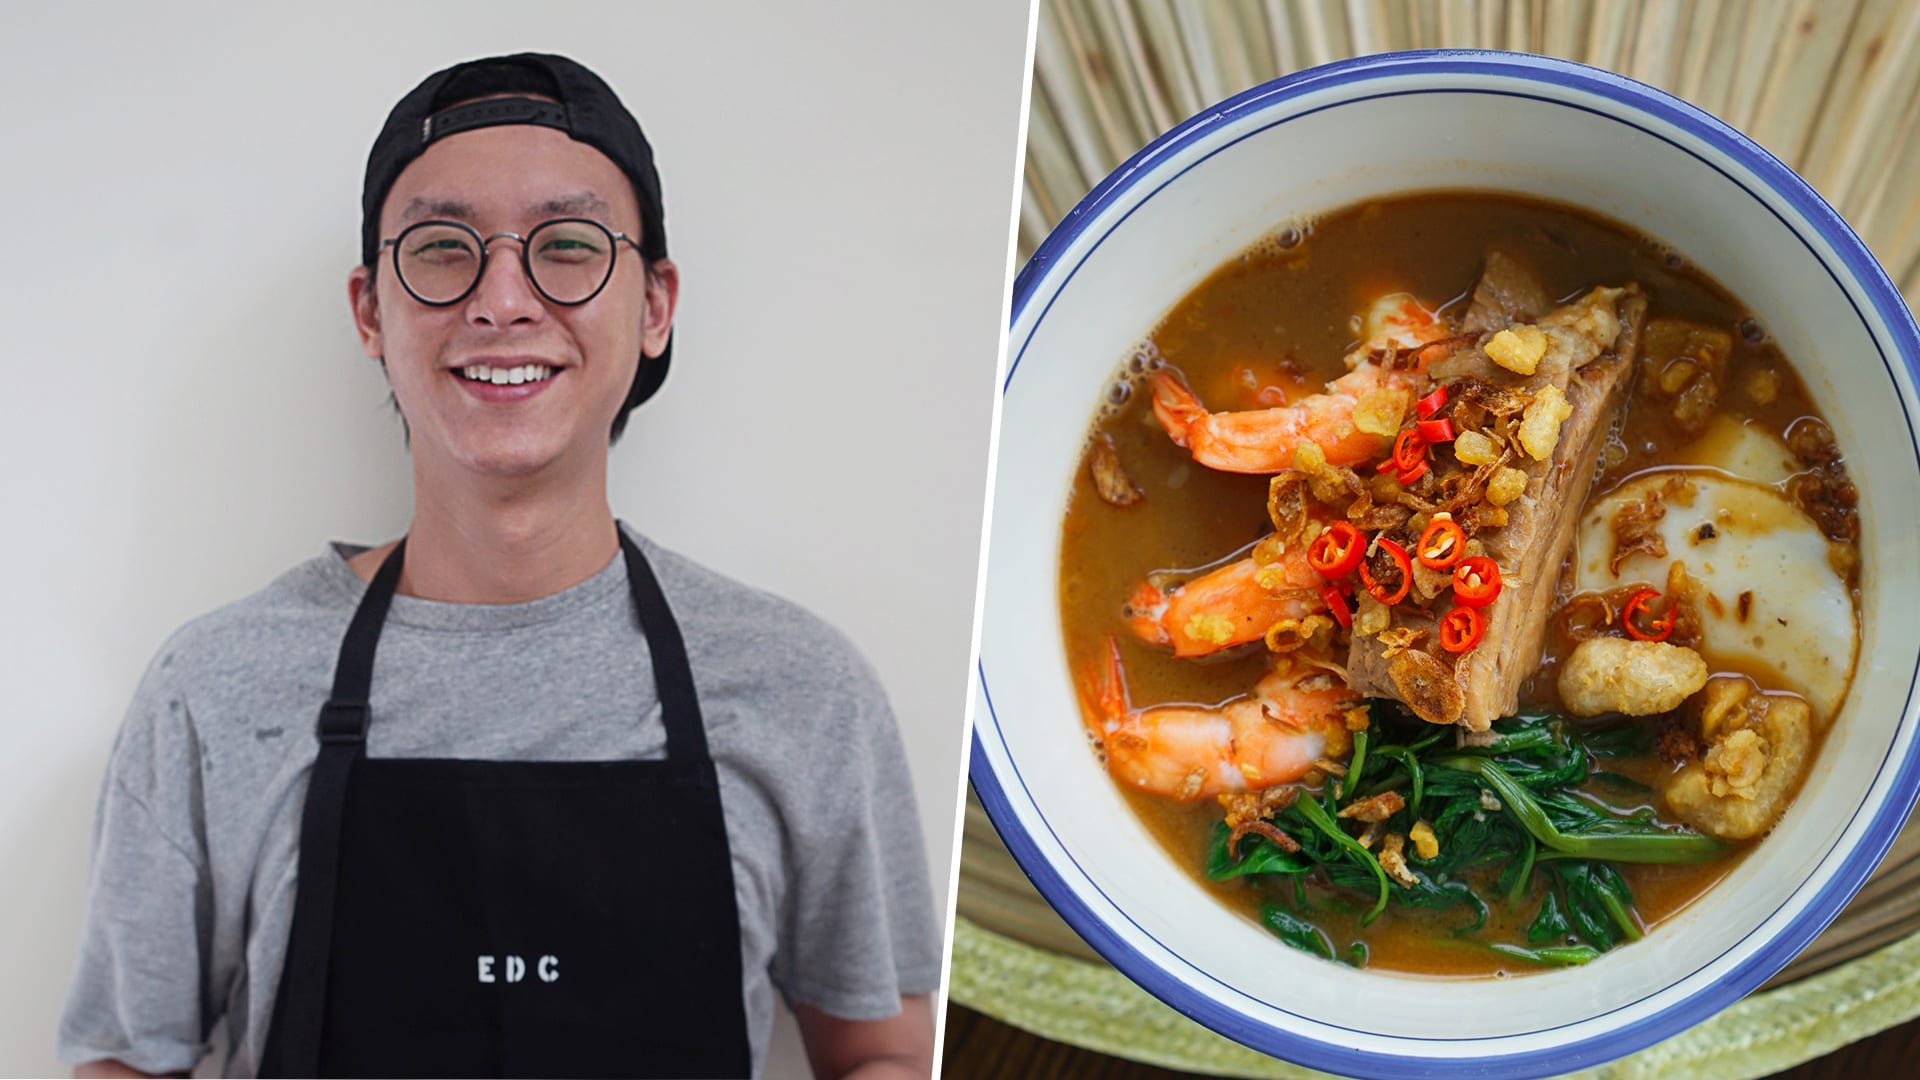 Home Cook Sells $20 Prawn Mee With Tonkotsu-Style Soup & Tiger Prawns